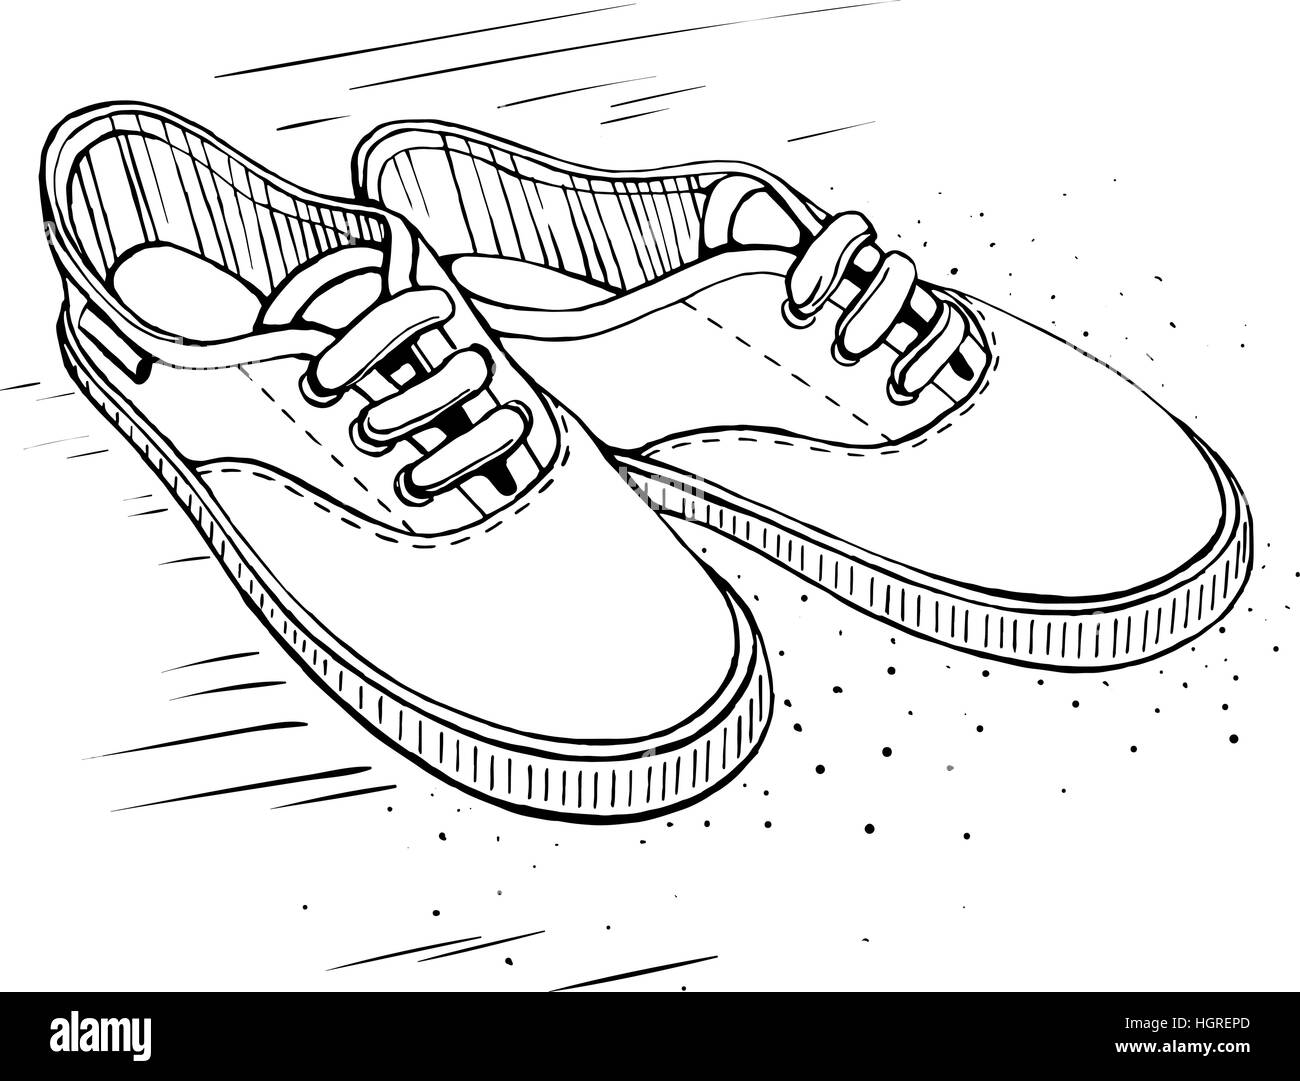 Cartoon sneaker Black and White Stock Photos & Images - Alamy